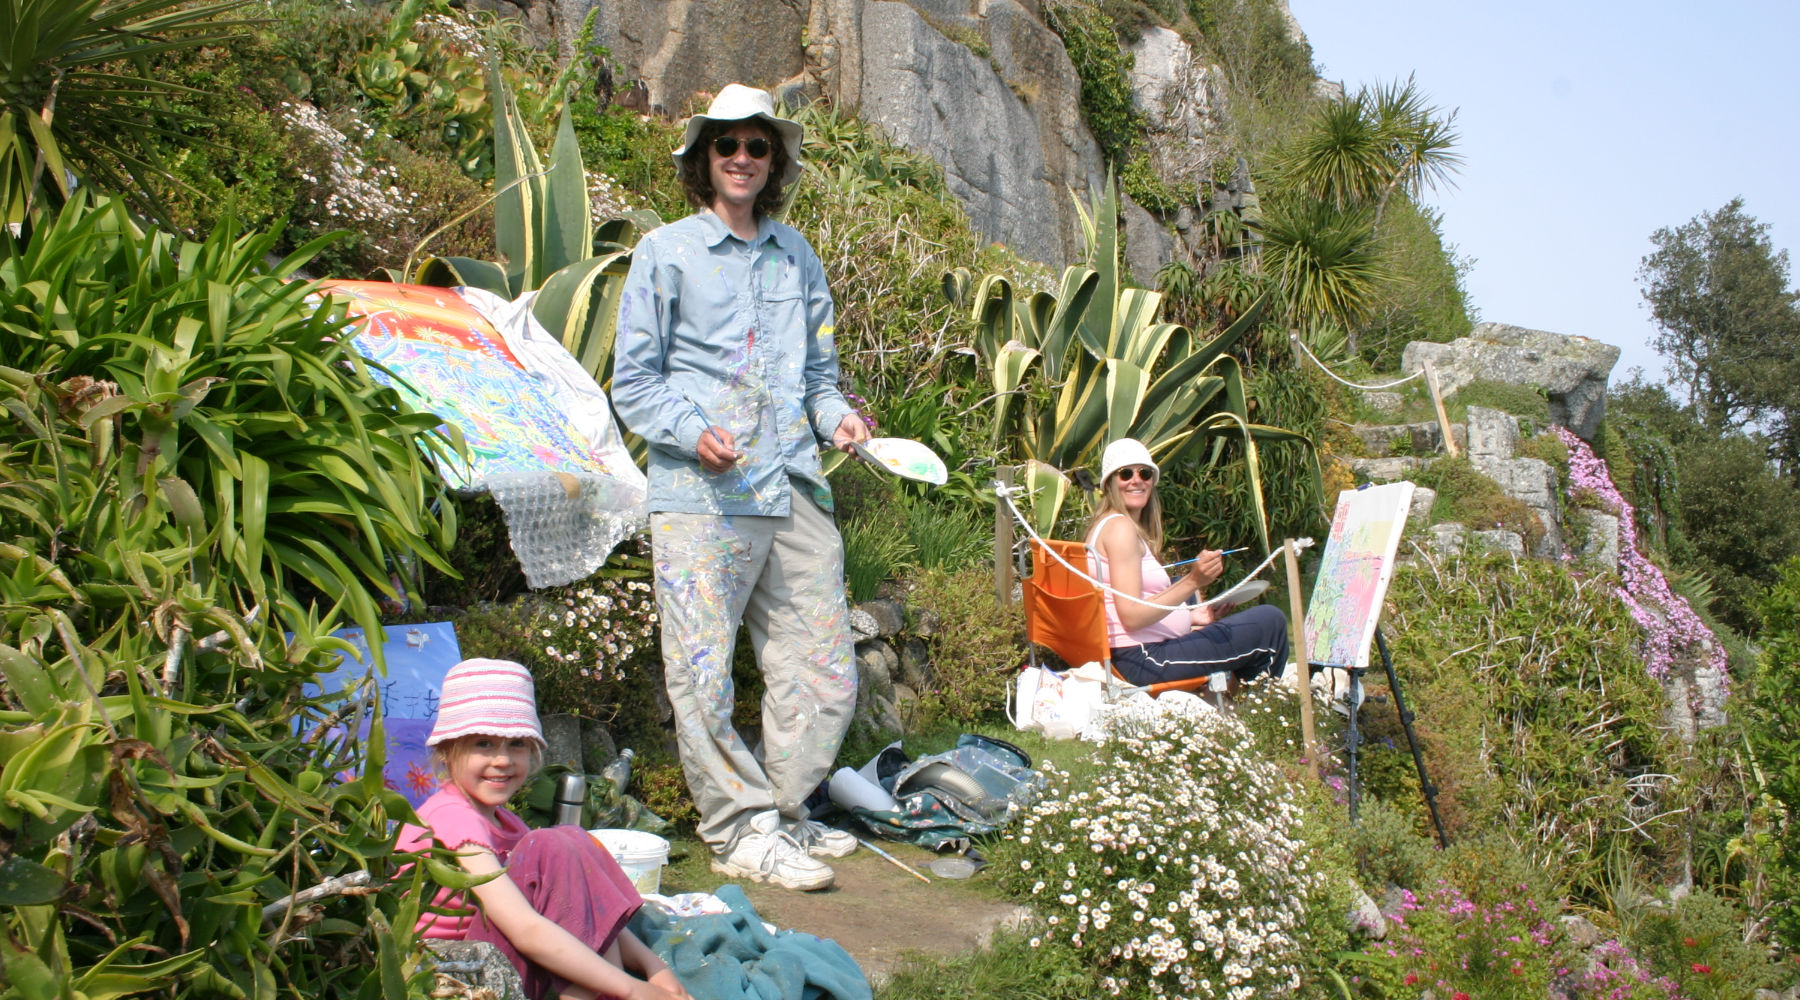 Cornwall Artist John Dyer with Cornish artist Joanne Short and their daughter Martha-Lilly Dyer pictured on St Michael's Mount in Cornwall in 2006